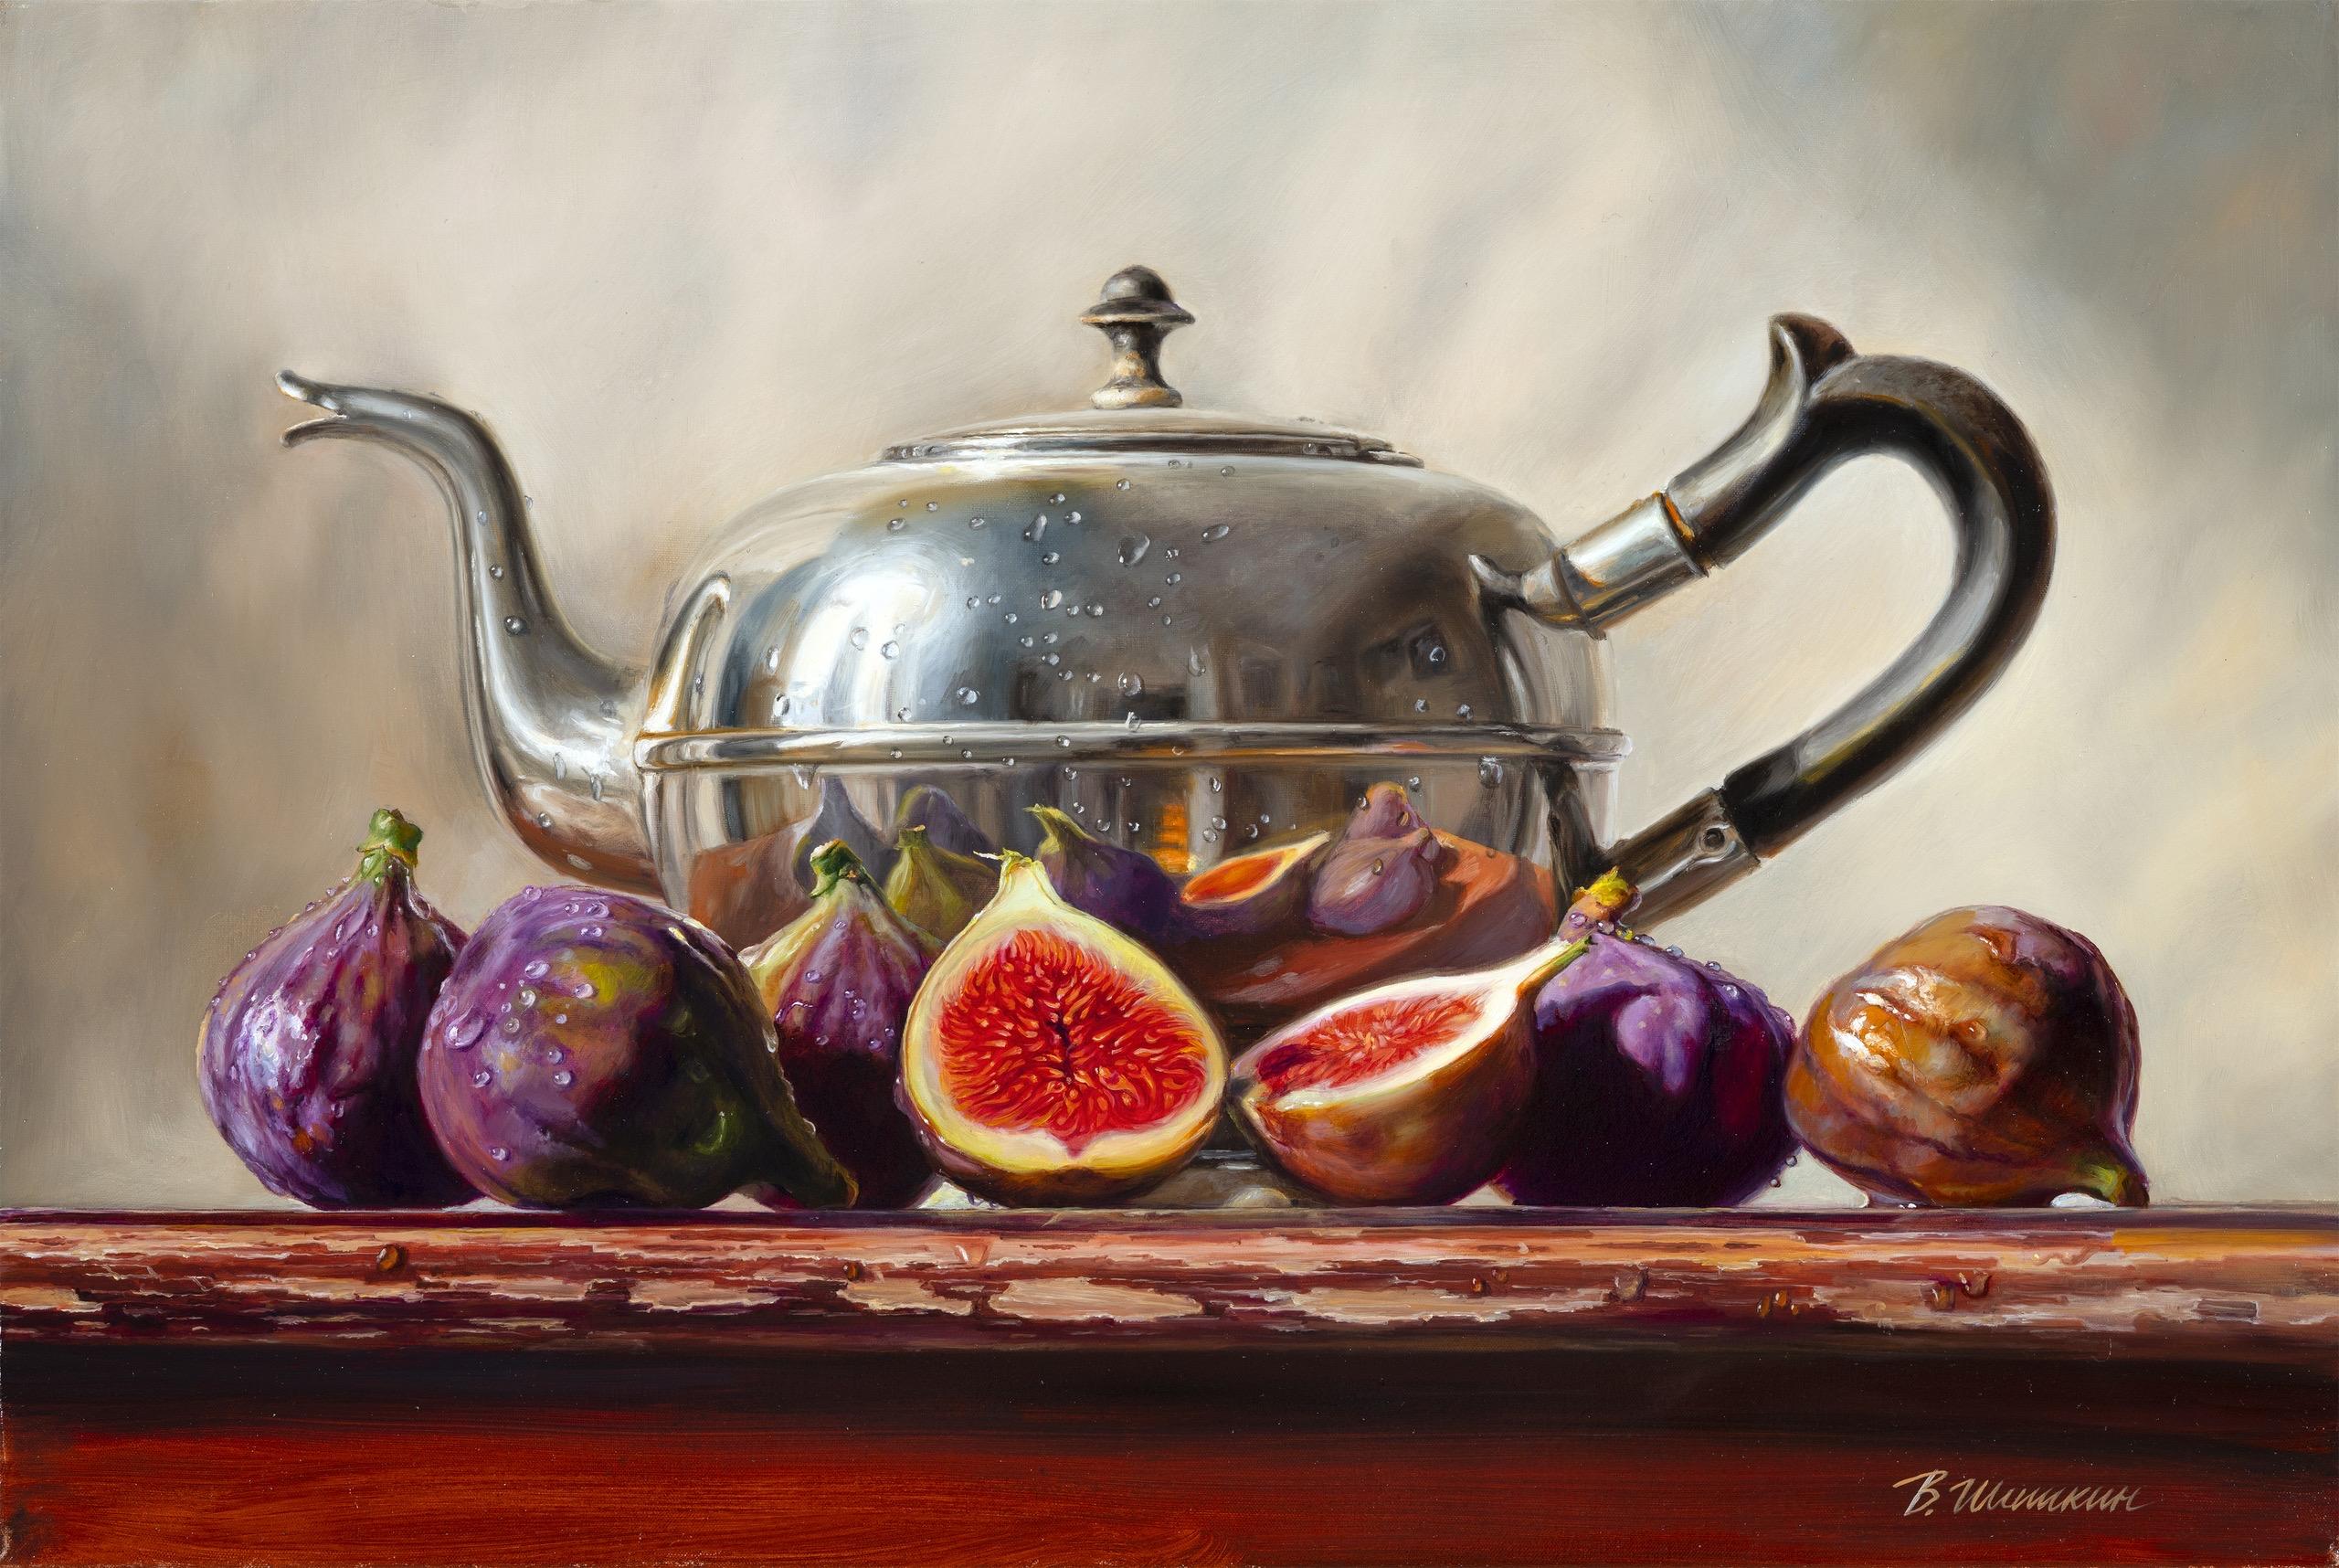 Kettle and figs